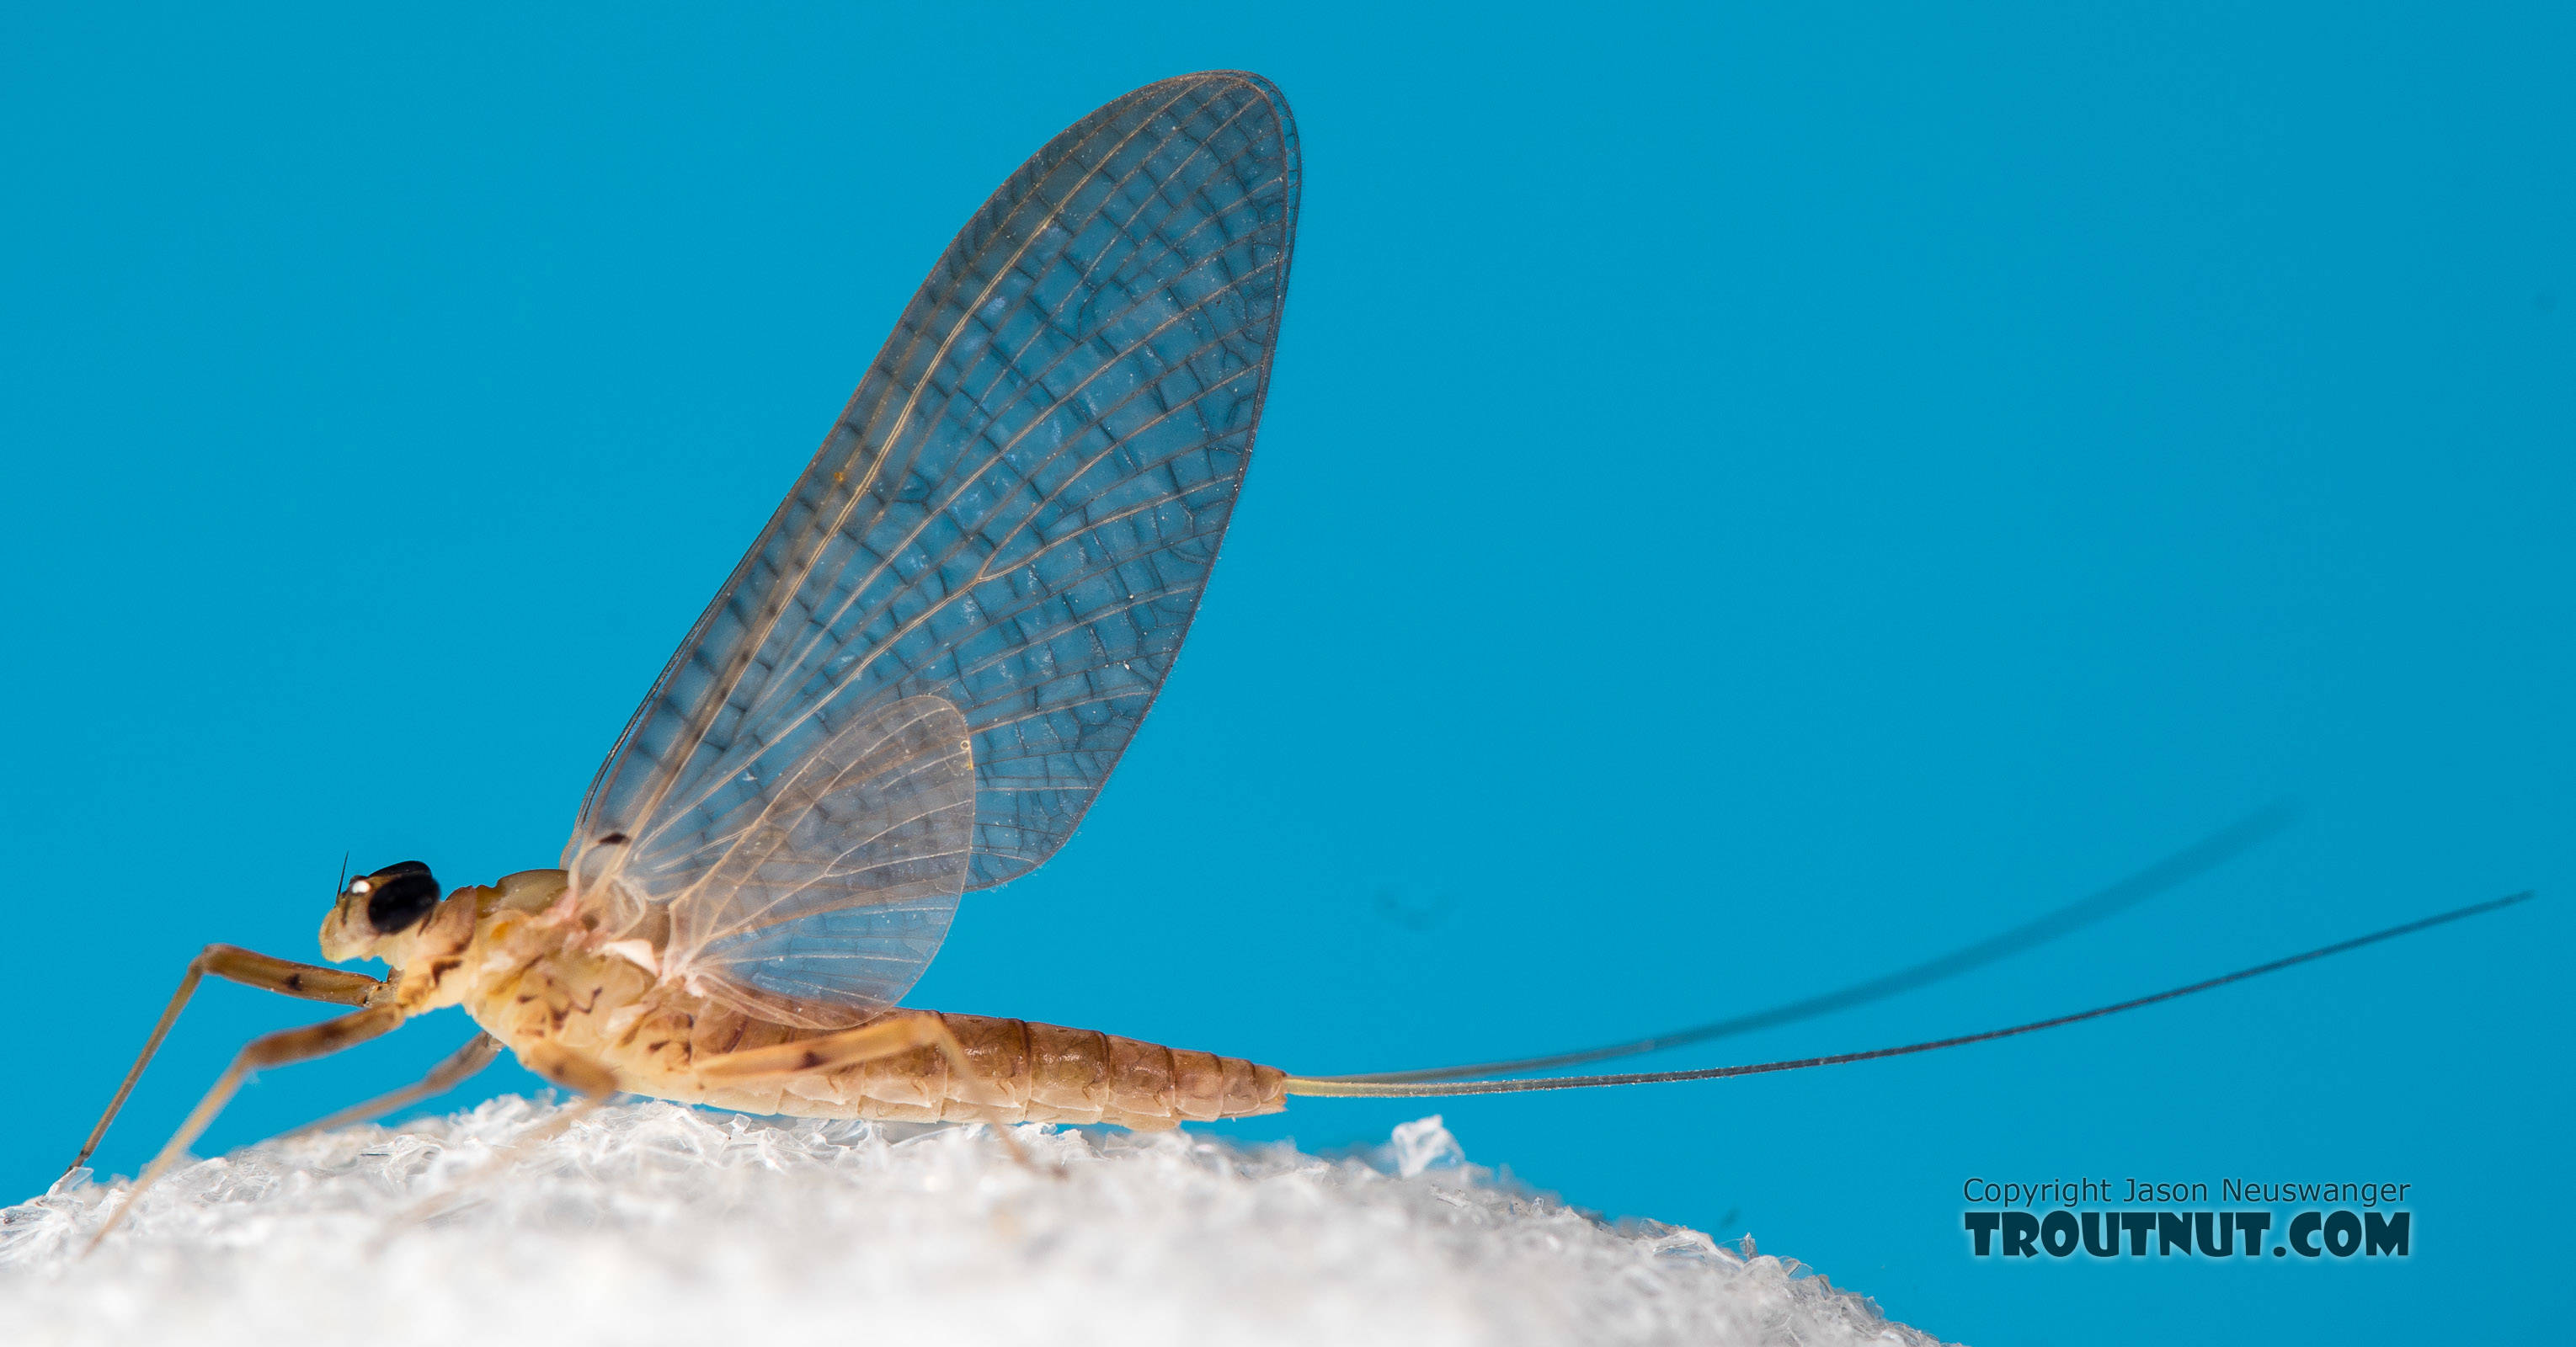 Female Epeorus albertae (Pink Lady) Mayfly Dun from the North Fork Stillaguamish River in Washington